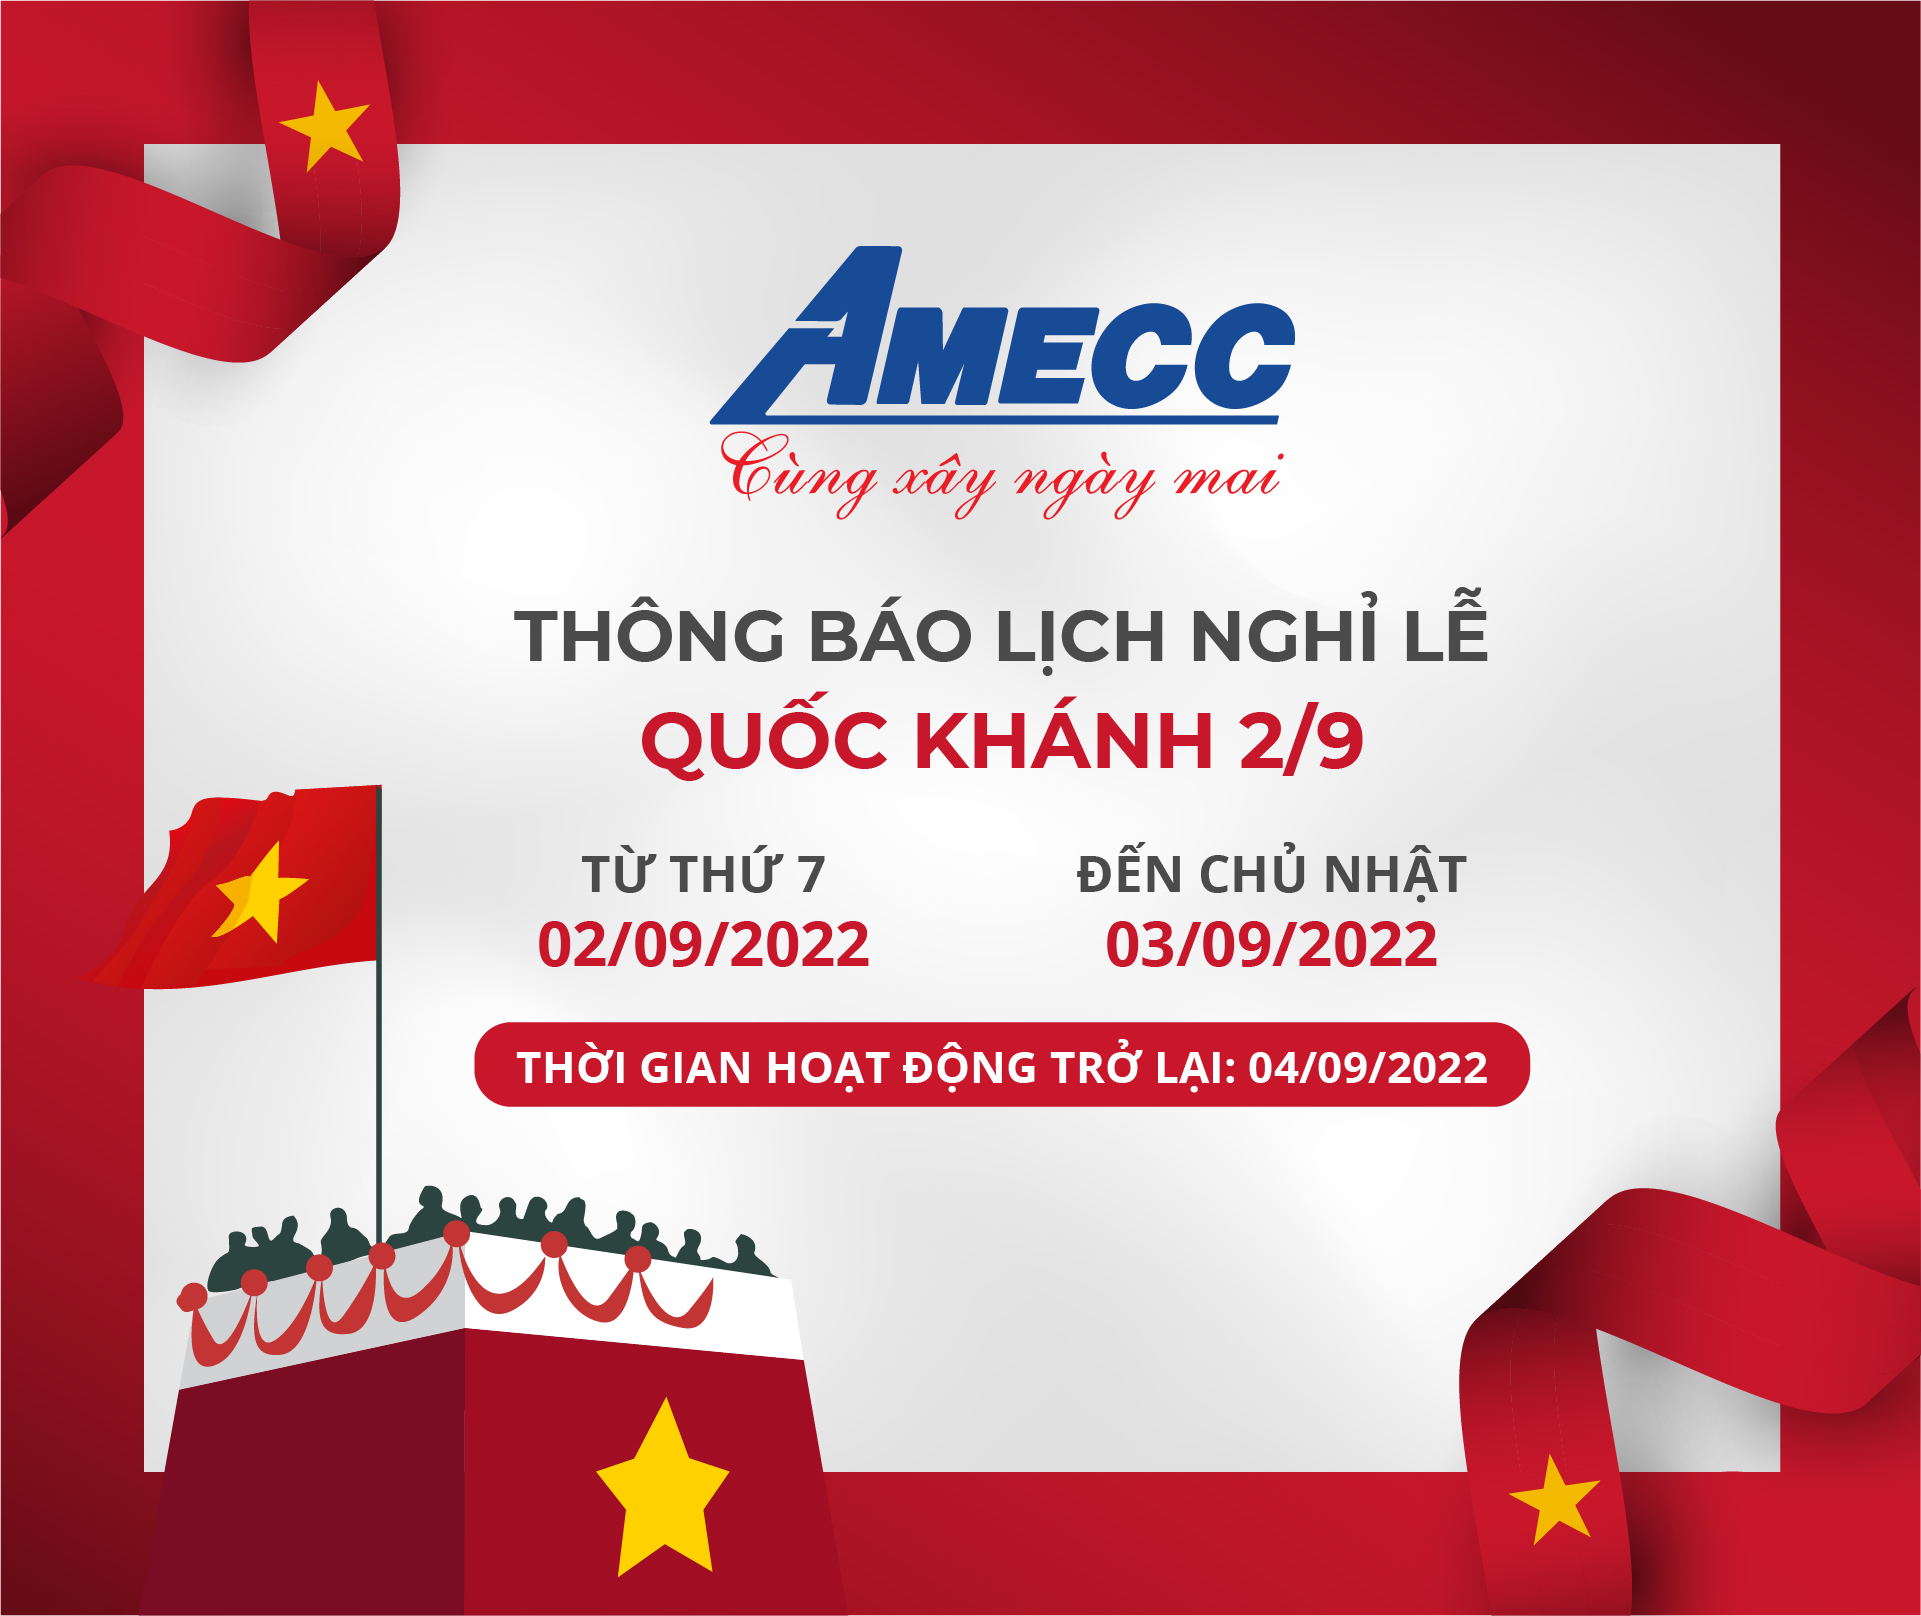 Amecc mechanical construction joint stock company announces the schedule for the vietnam national day holiday on september 2, 2023